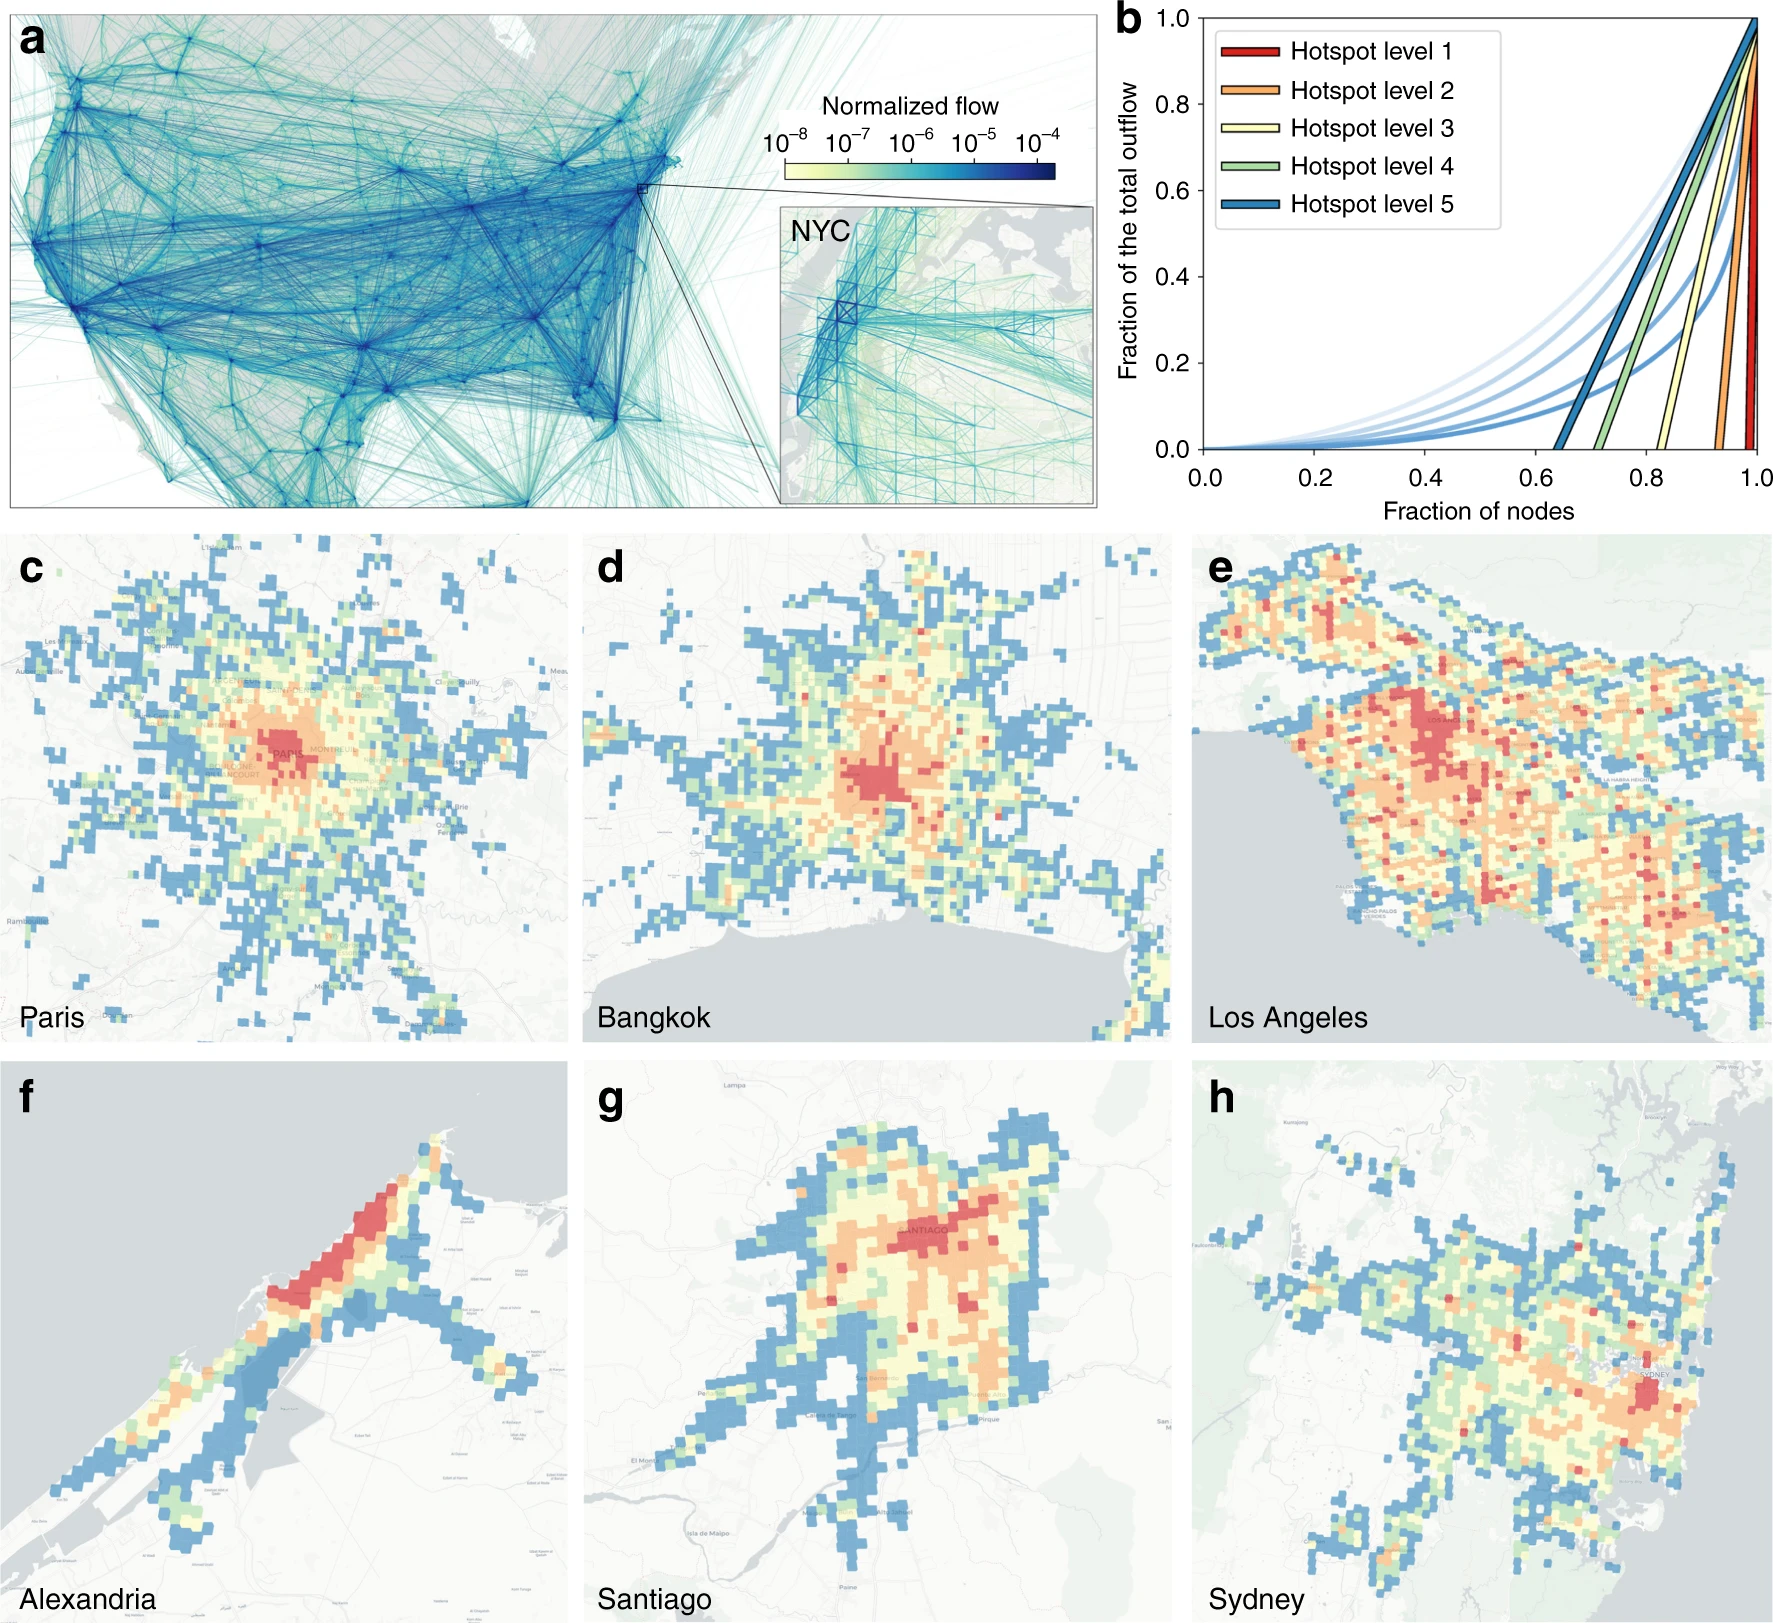 Figure 1 from the paper linked below, showing visualizations of mobility and location hotspots in 7 large cities